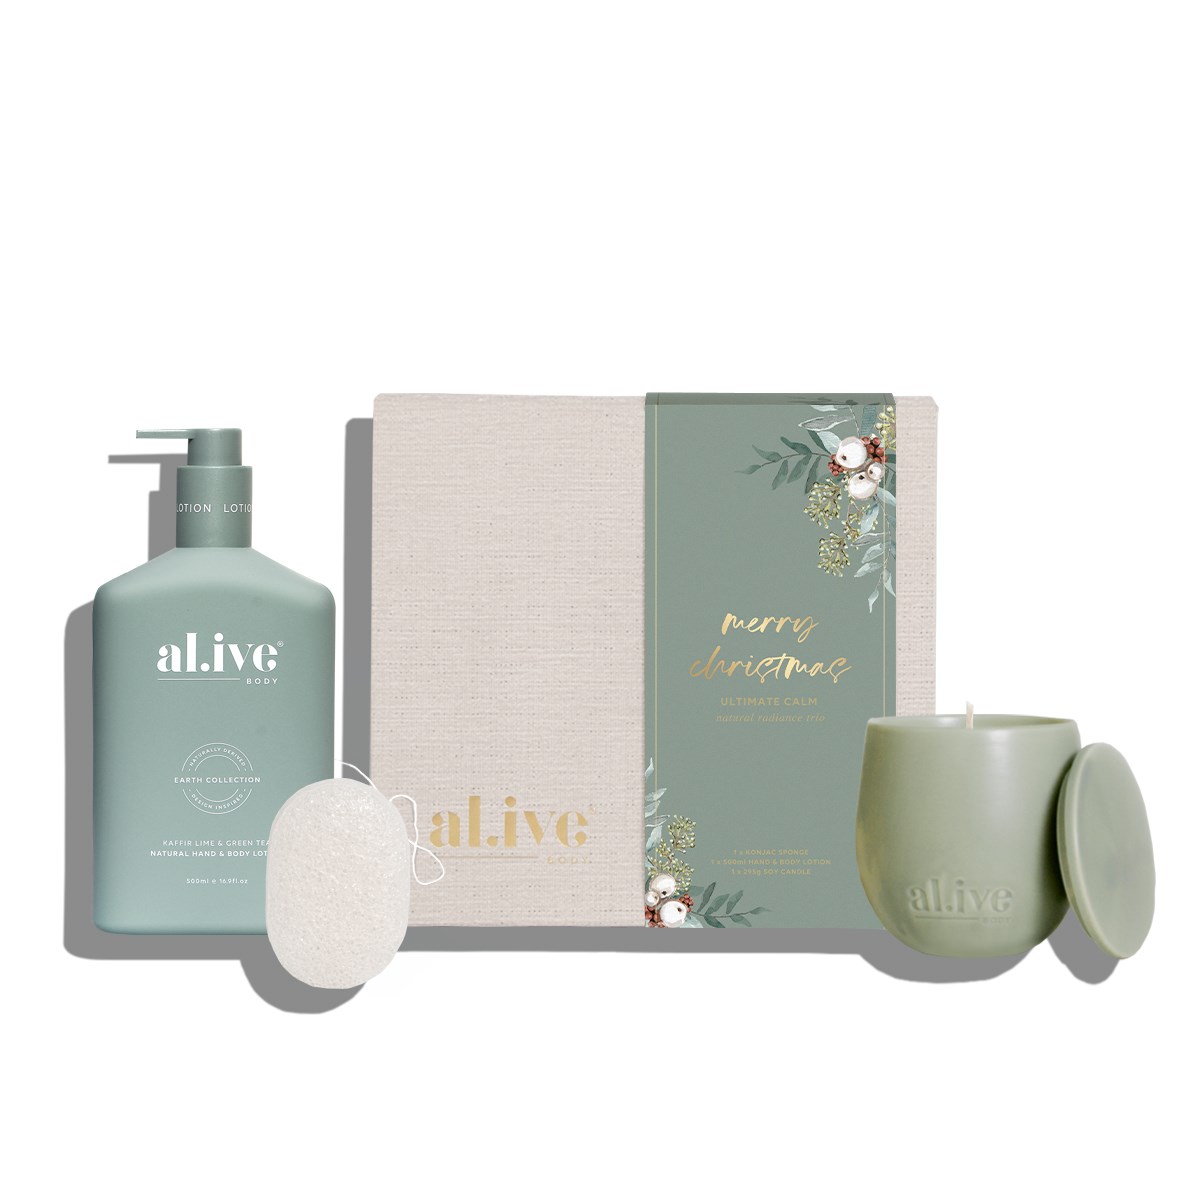 Alive body Ultimate Calm gift set $107.00